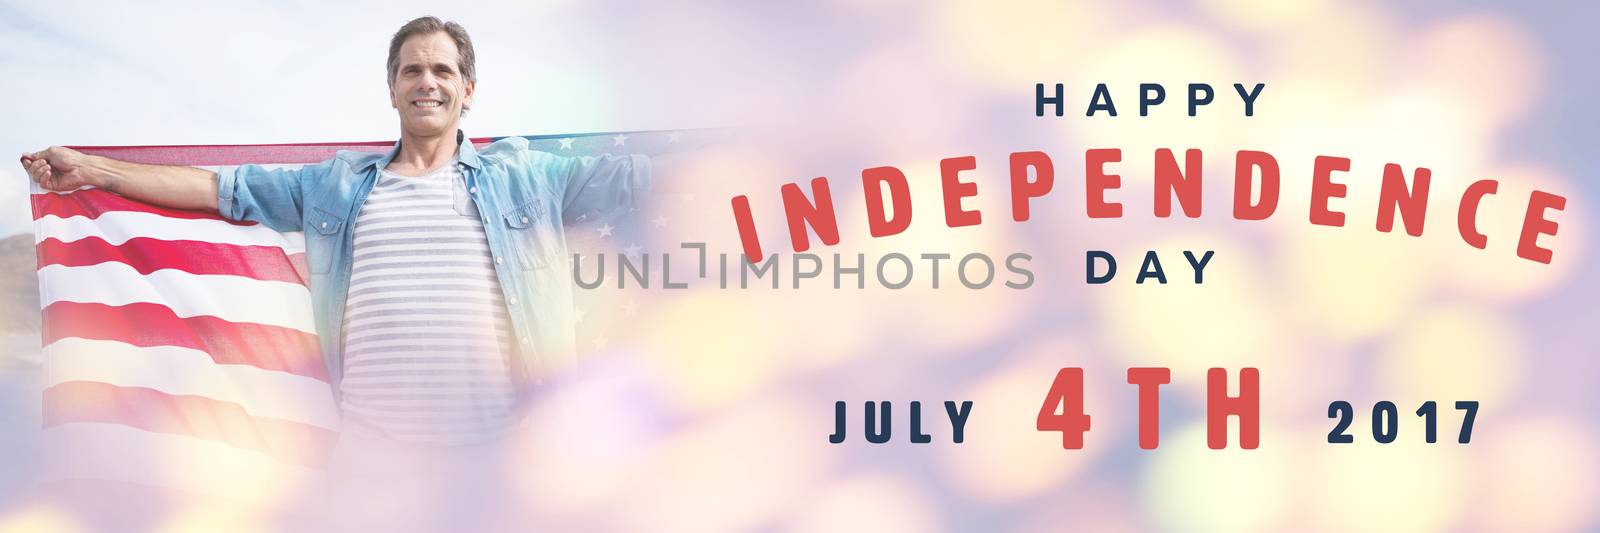 Happy 4th of july text on white background against man holding american flag at beach